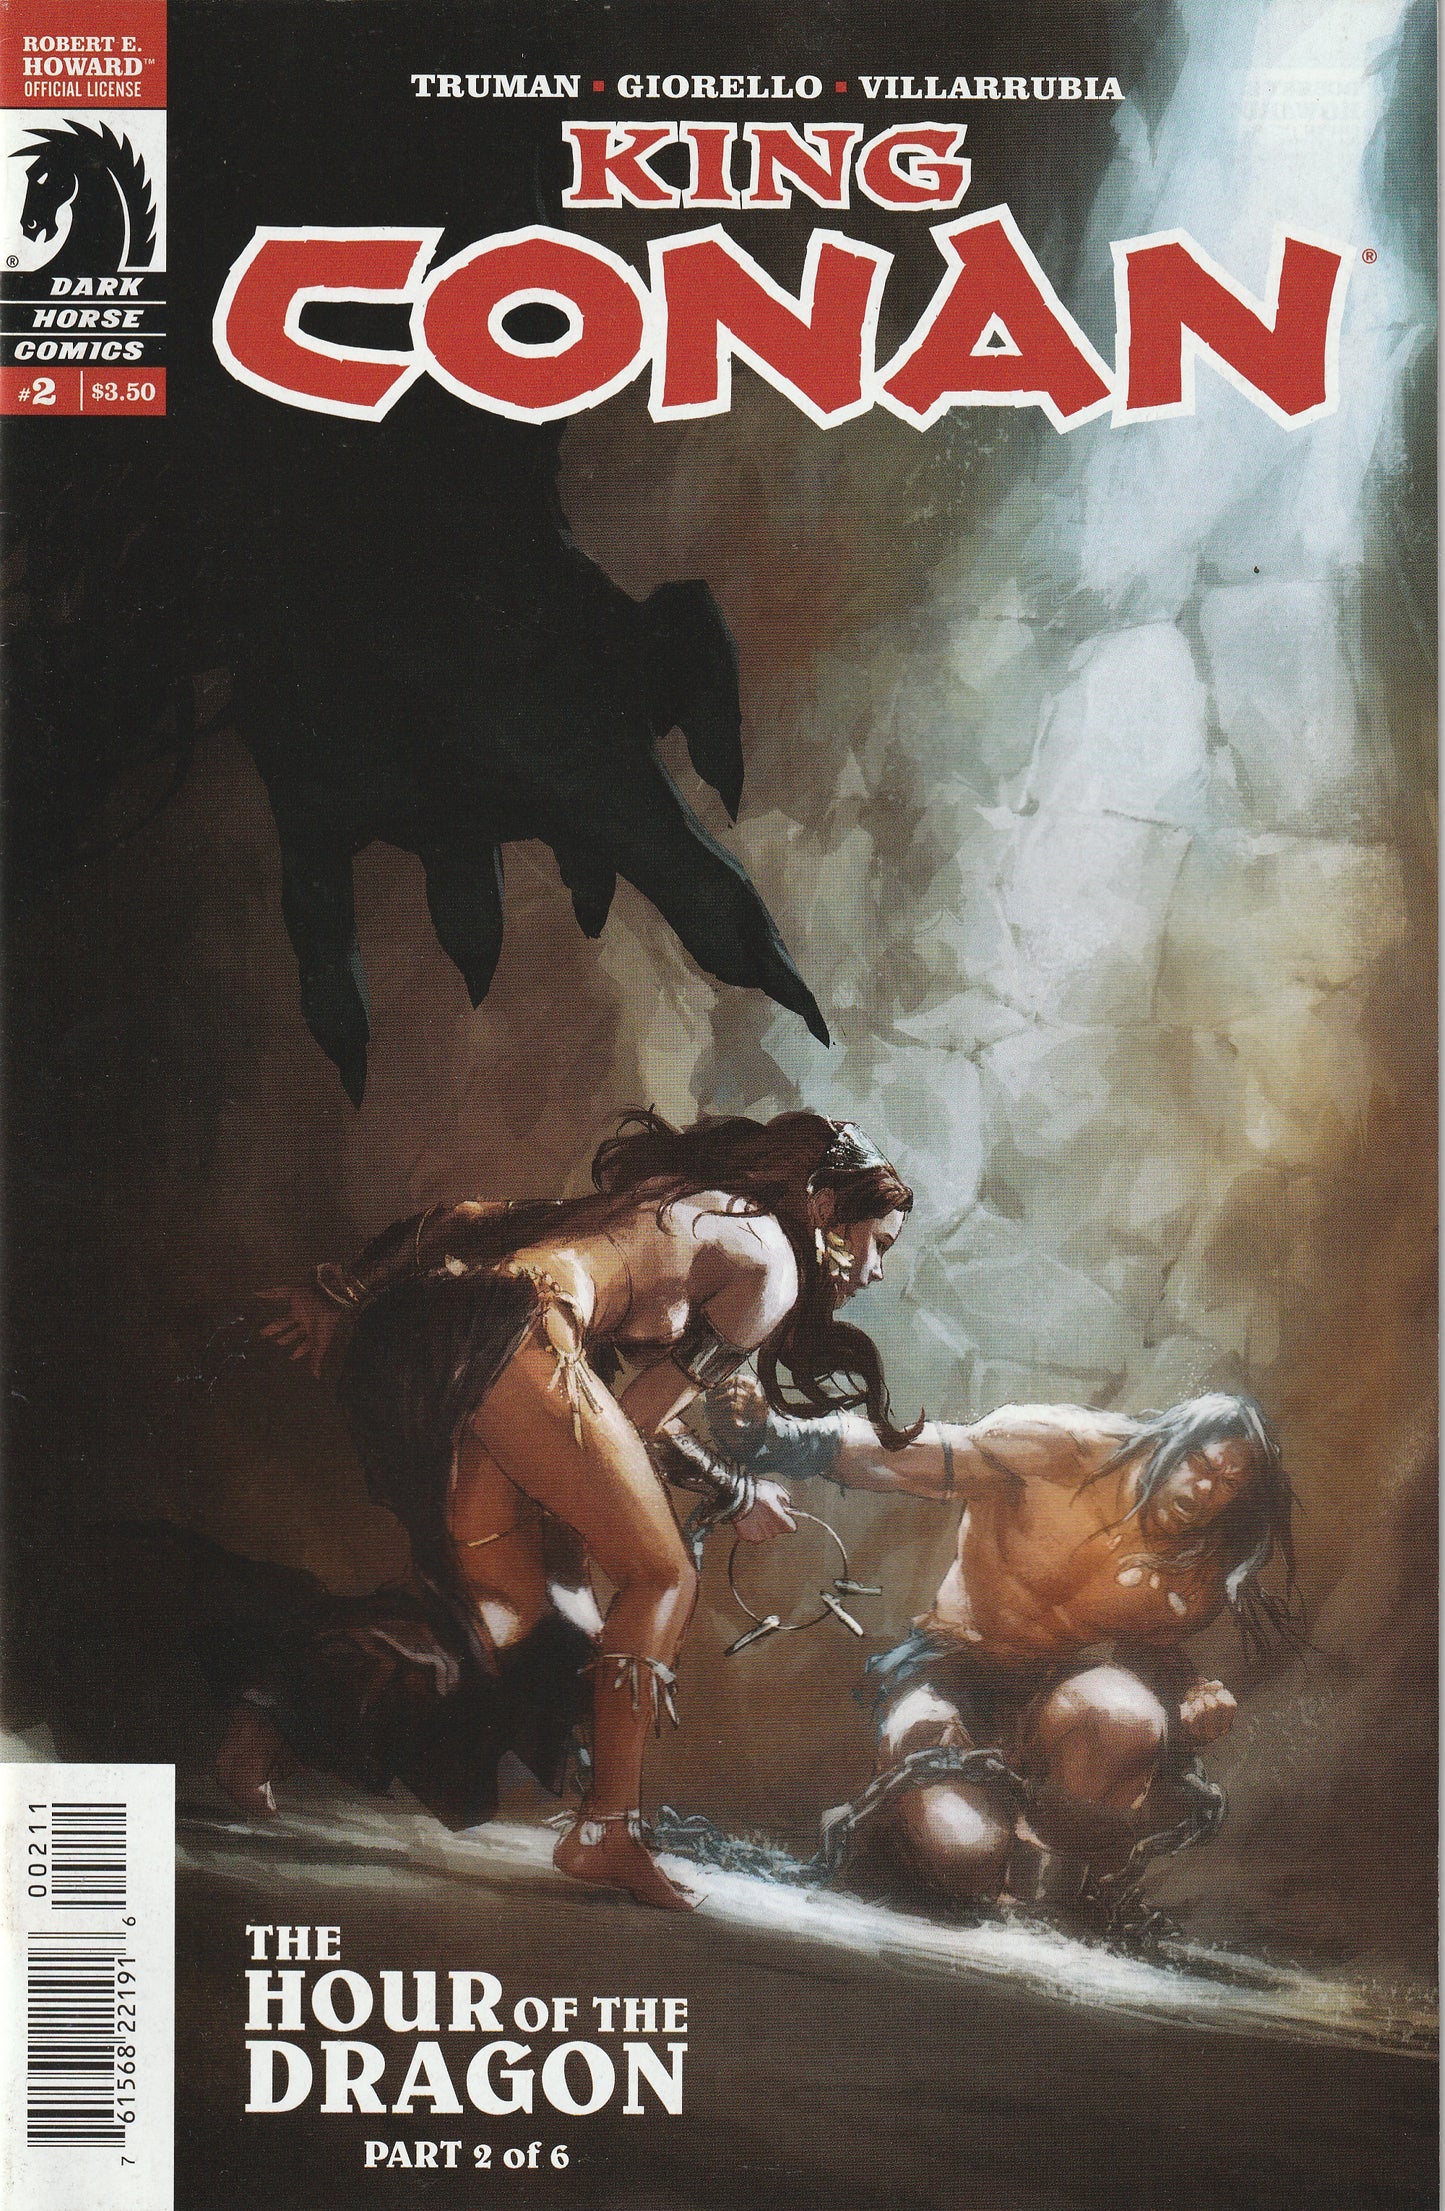 King Conan The Hour of the Dragon #2 (of 6)  (2013)